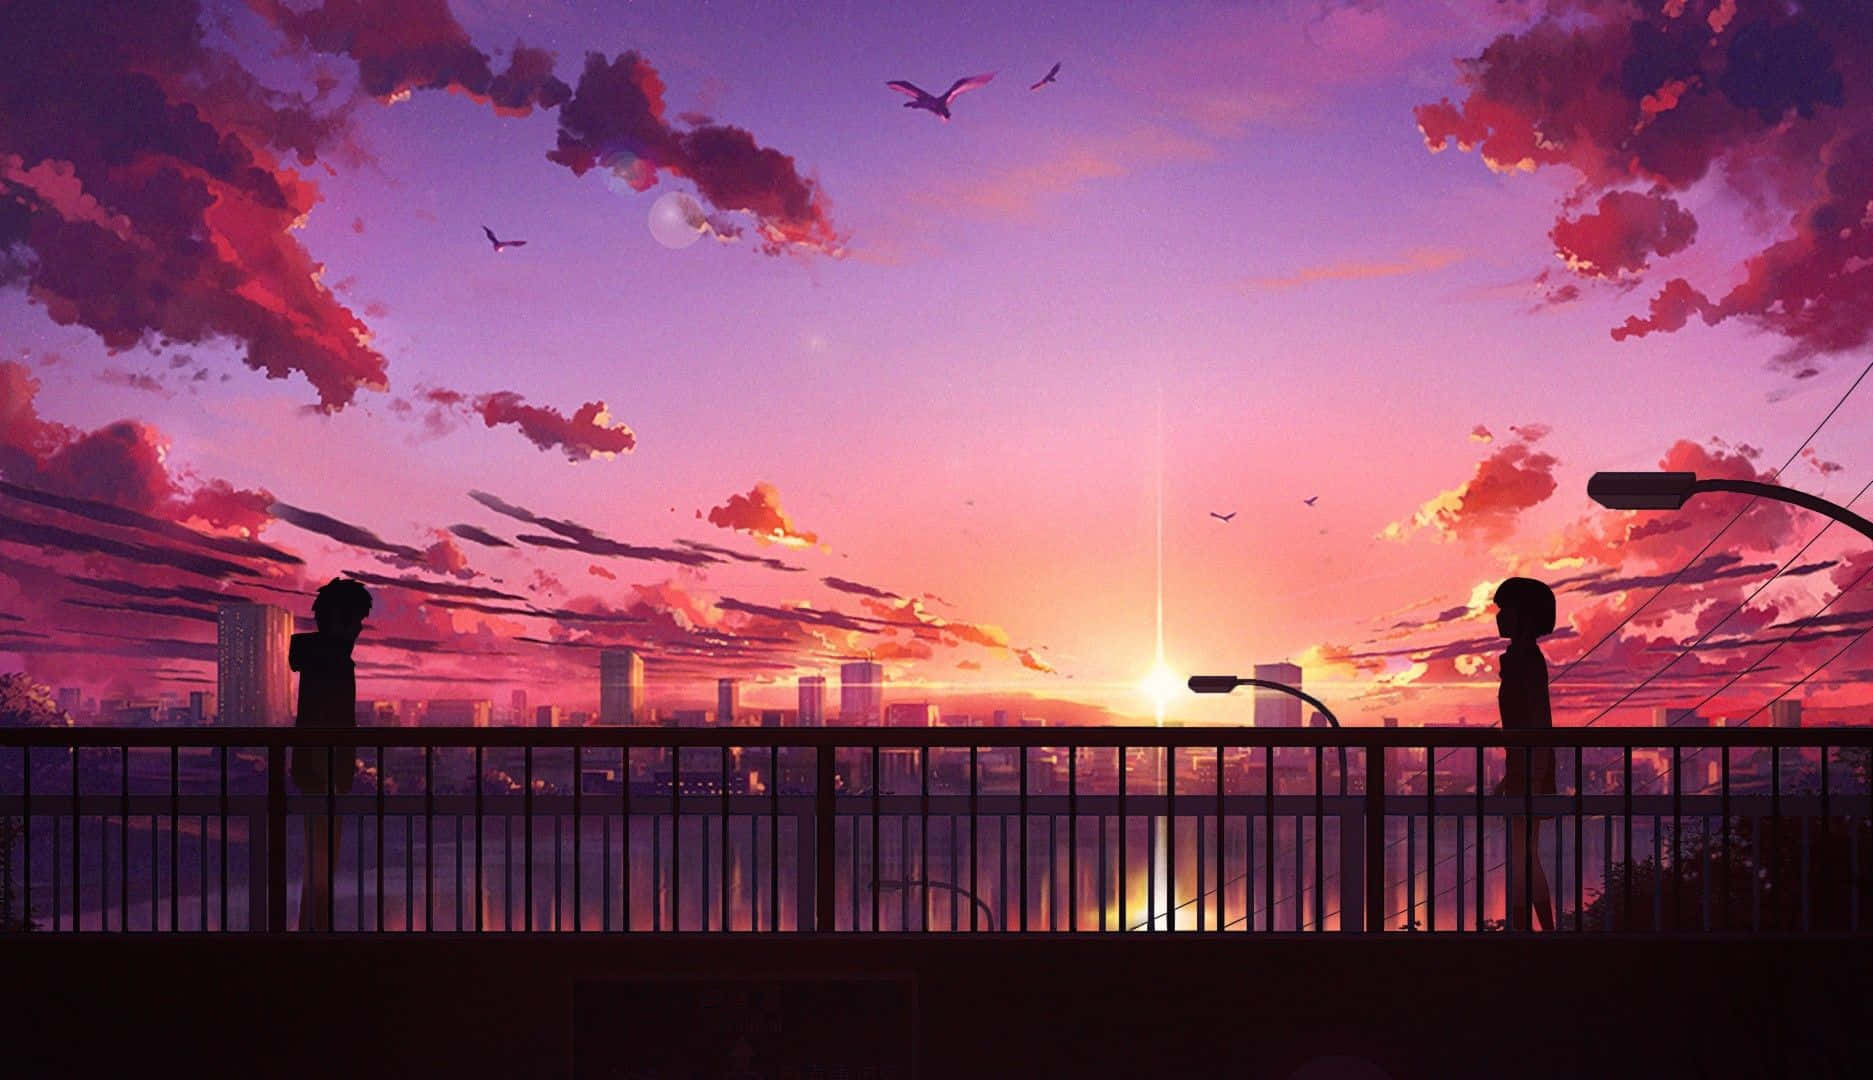 Immersed In The Beauty Of Nature, A Silhouette Of A Young Girl Sits And Admires The Stunning Anime Sunset. Background